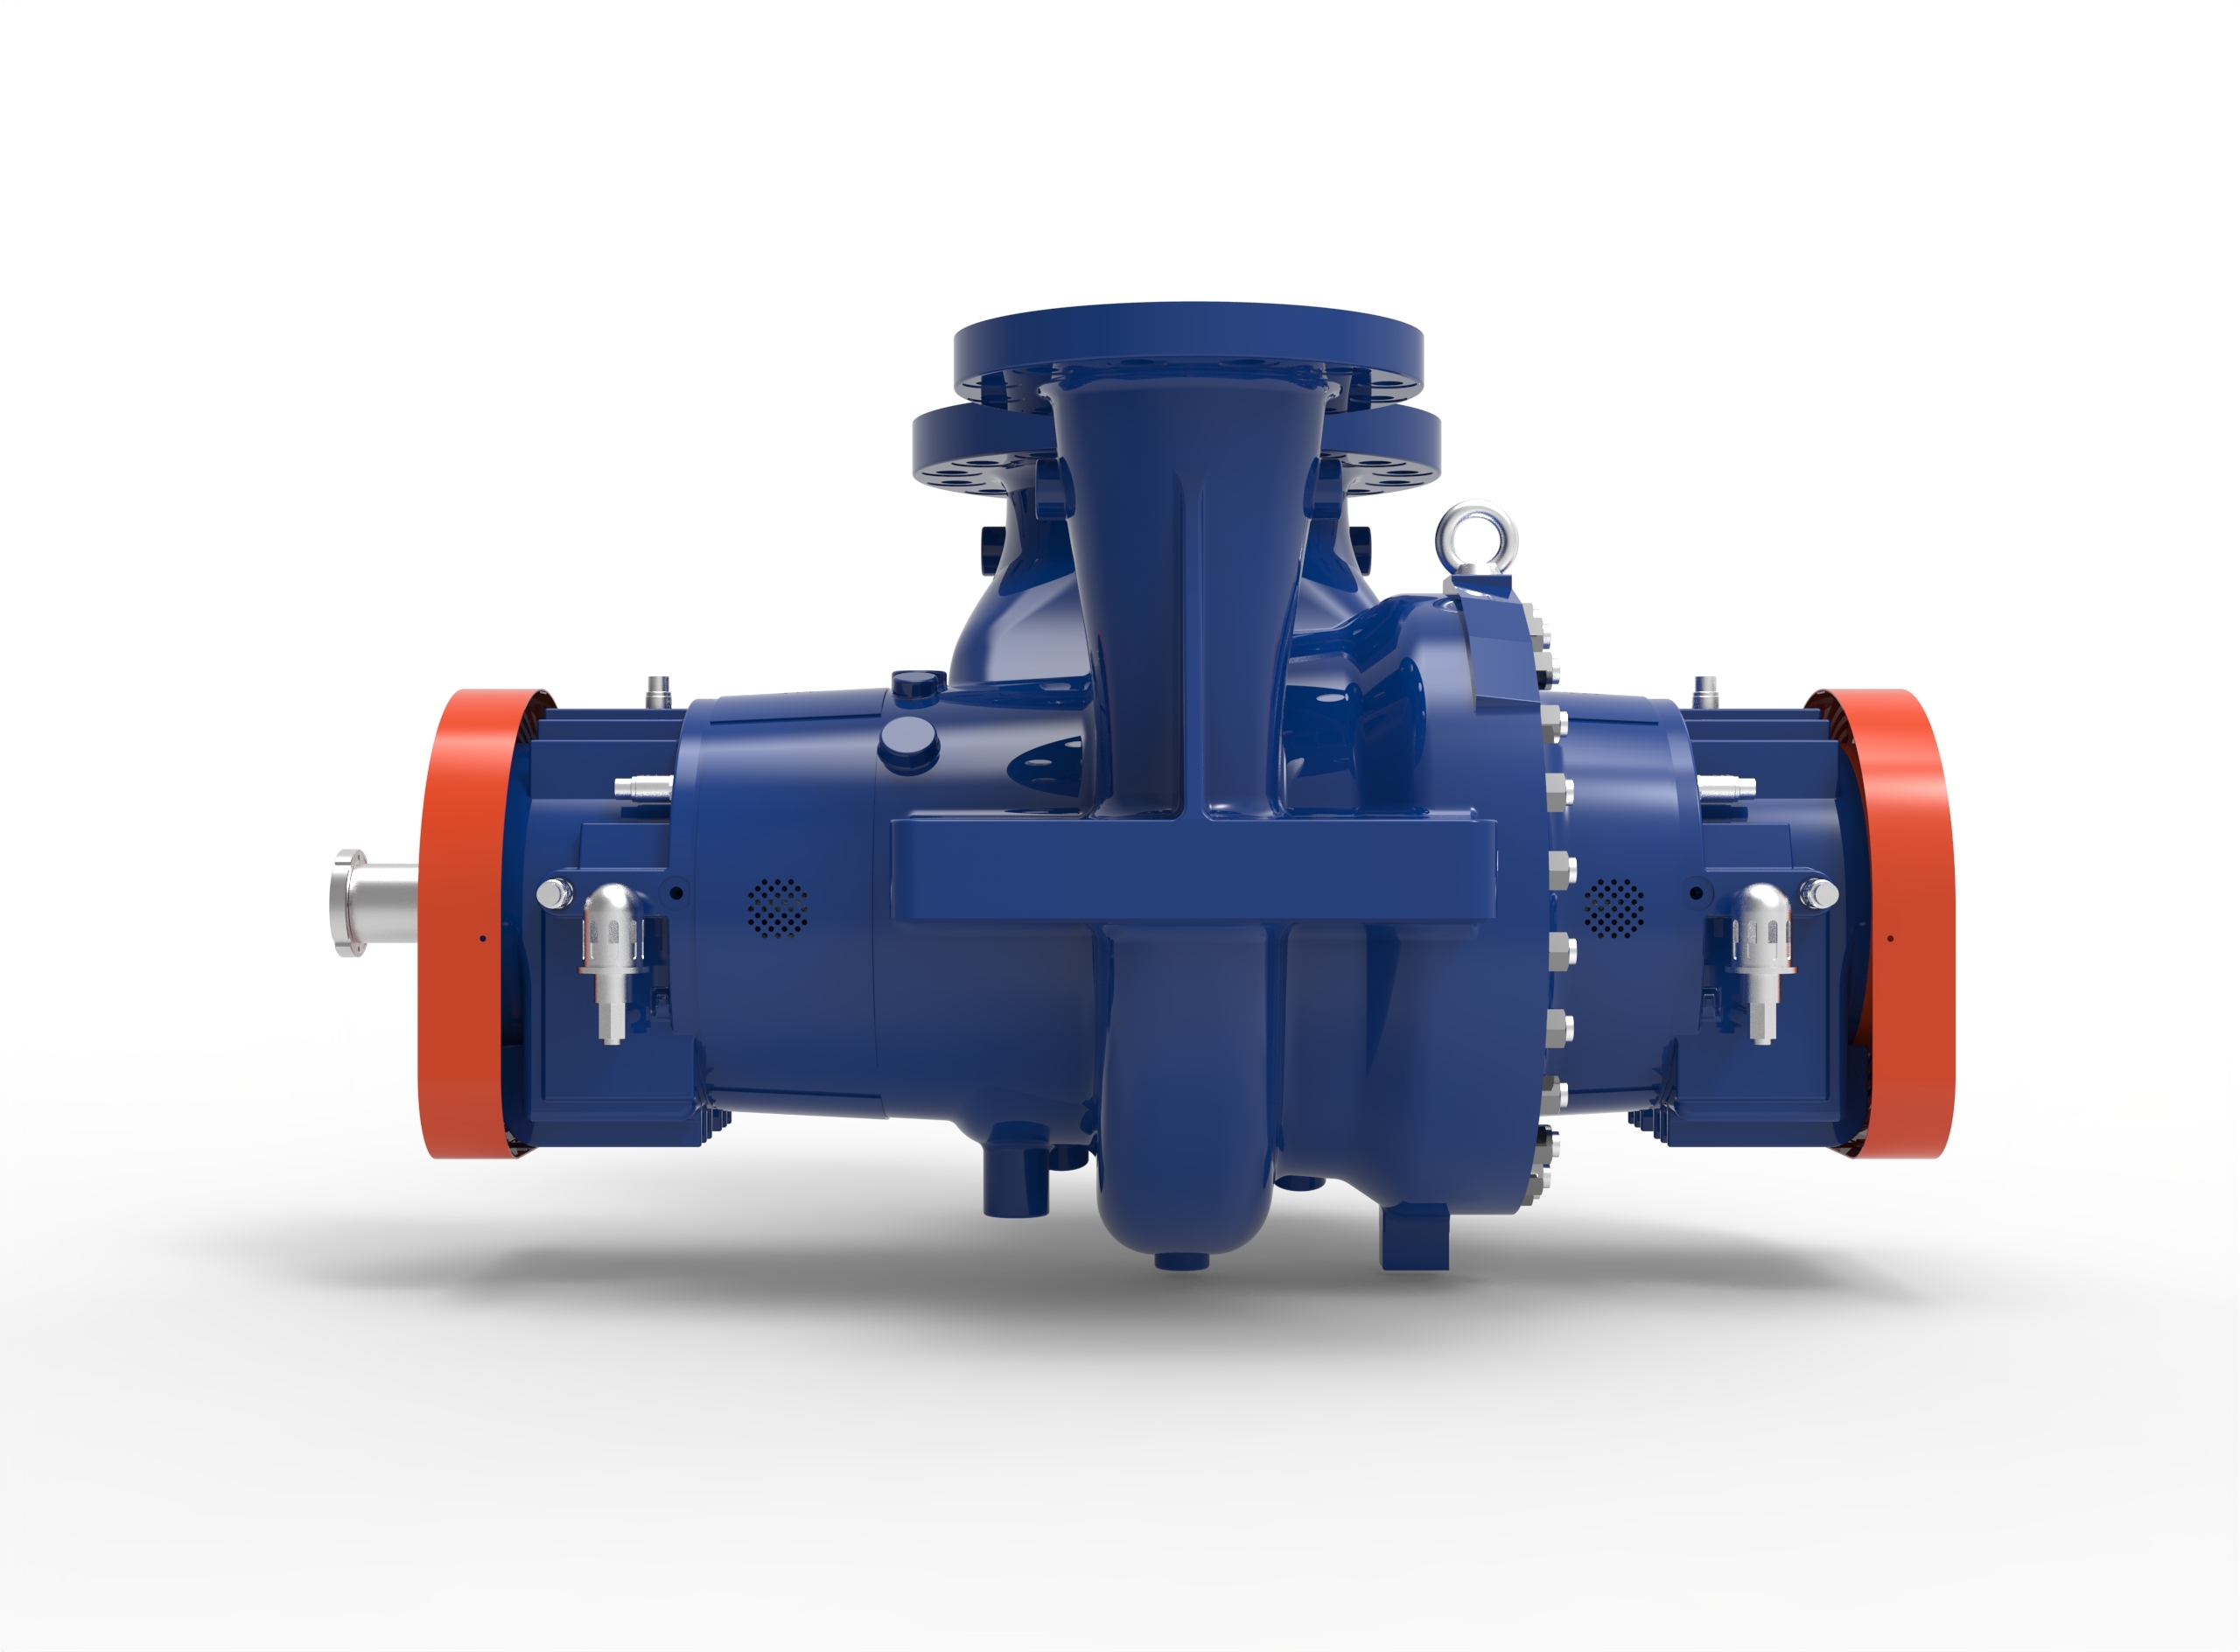 Backside view of a Termomeccanica Pompe DP BB2 TYPE API 610 Centrifugal Pump manufactured by Trillium Flow Technologies